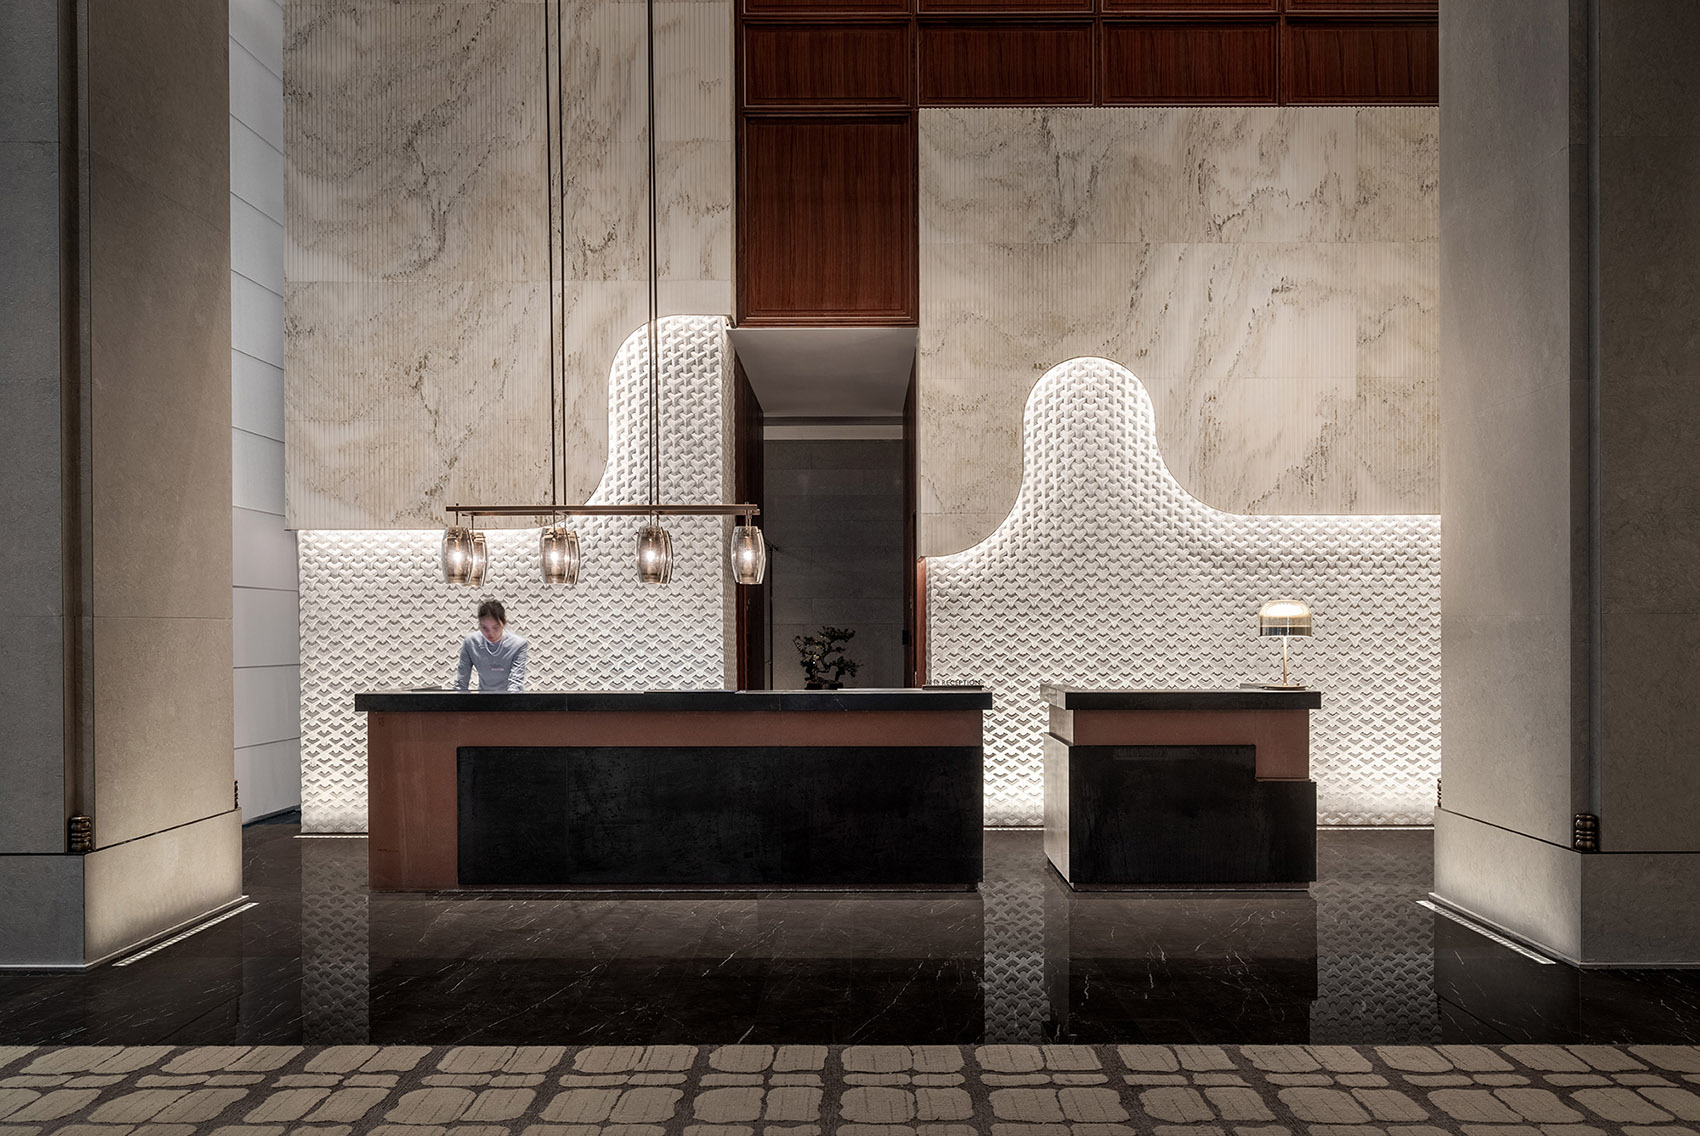 The front desk design of InterContinental Hotel